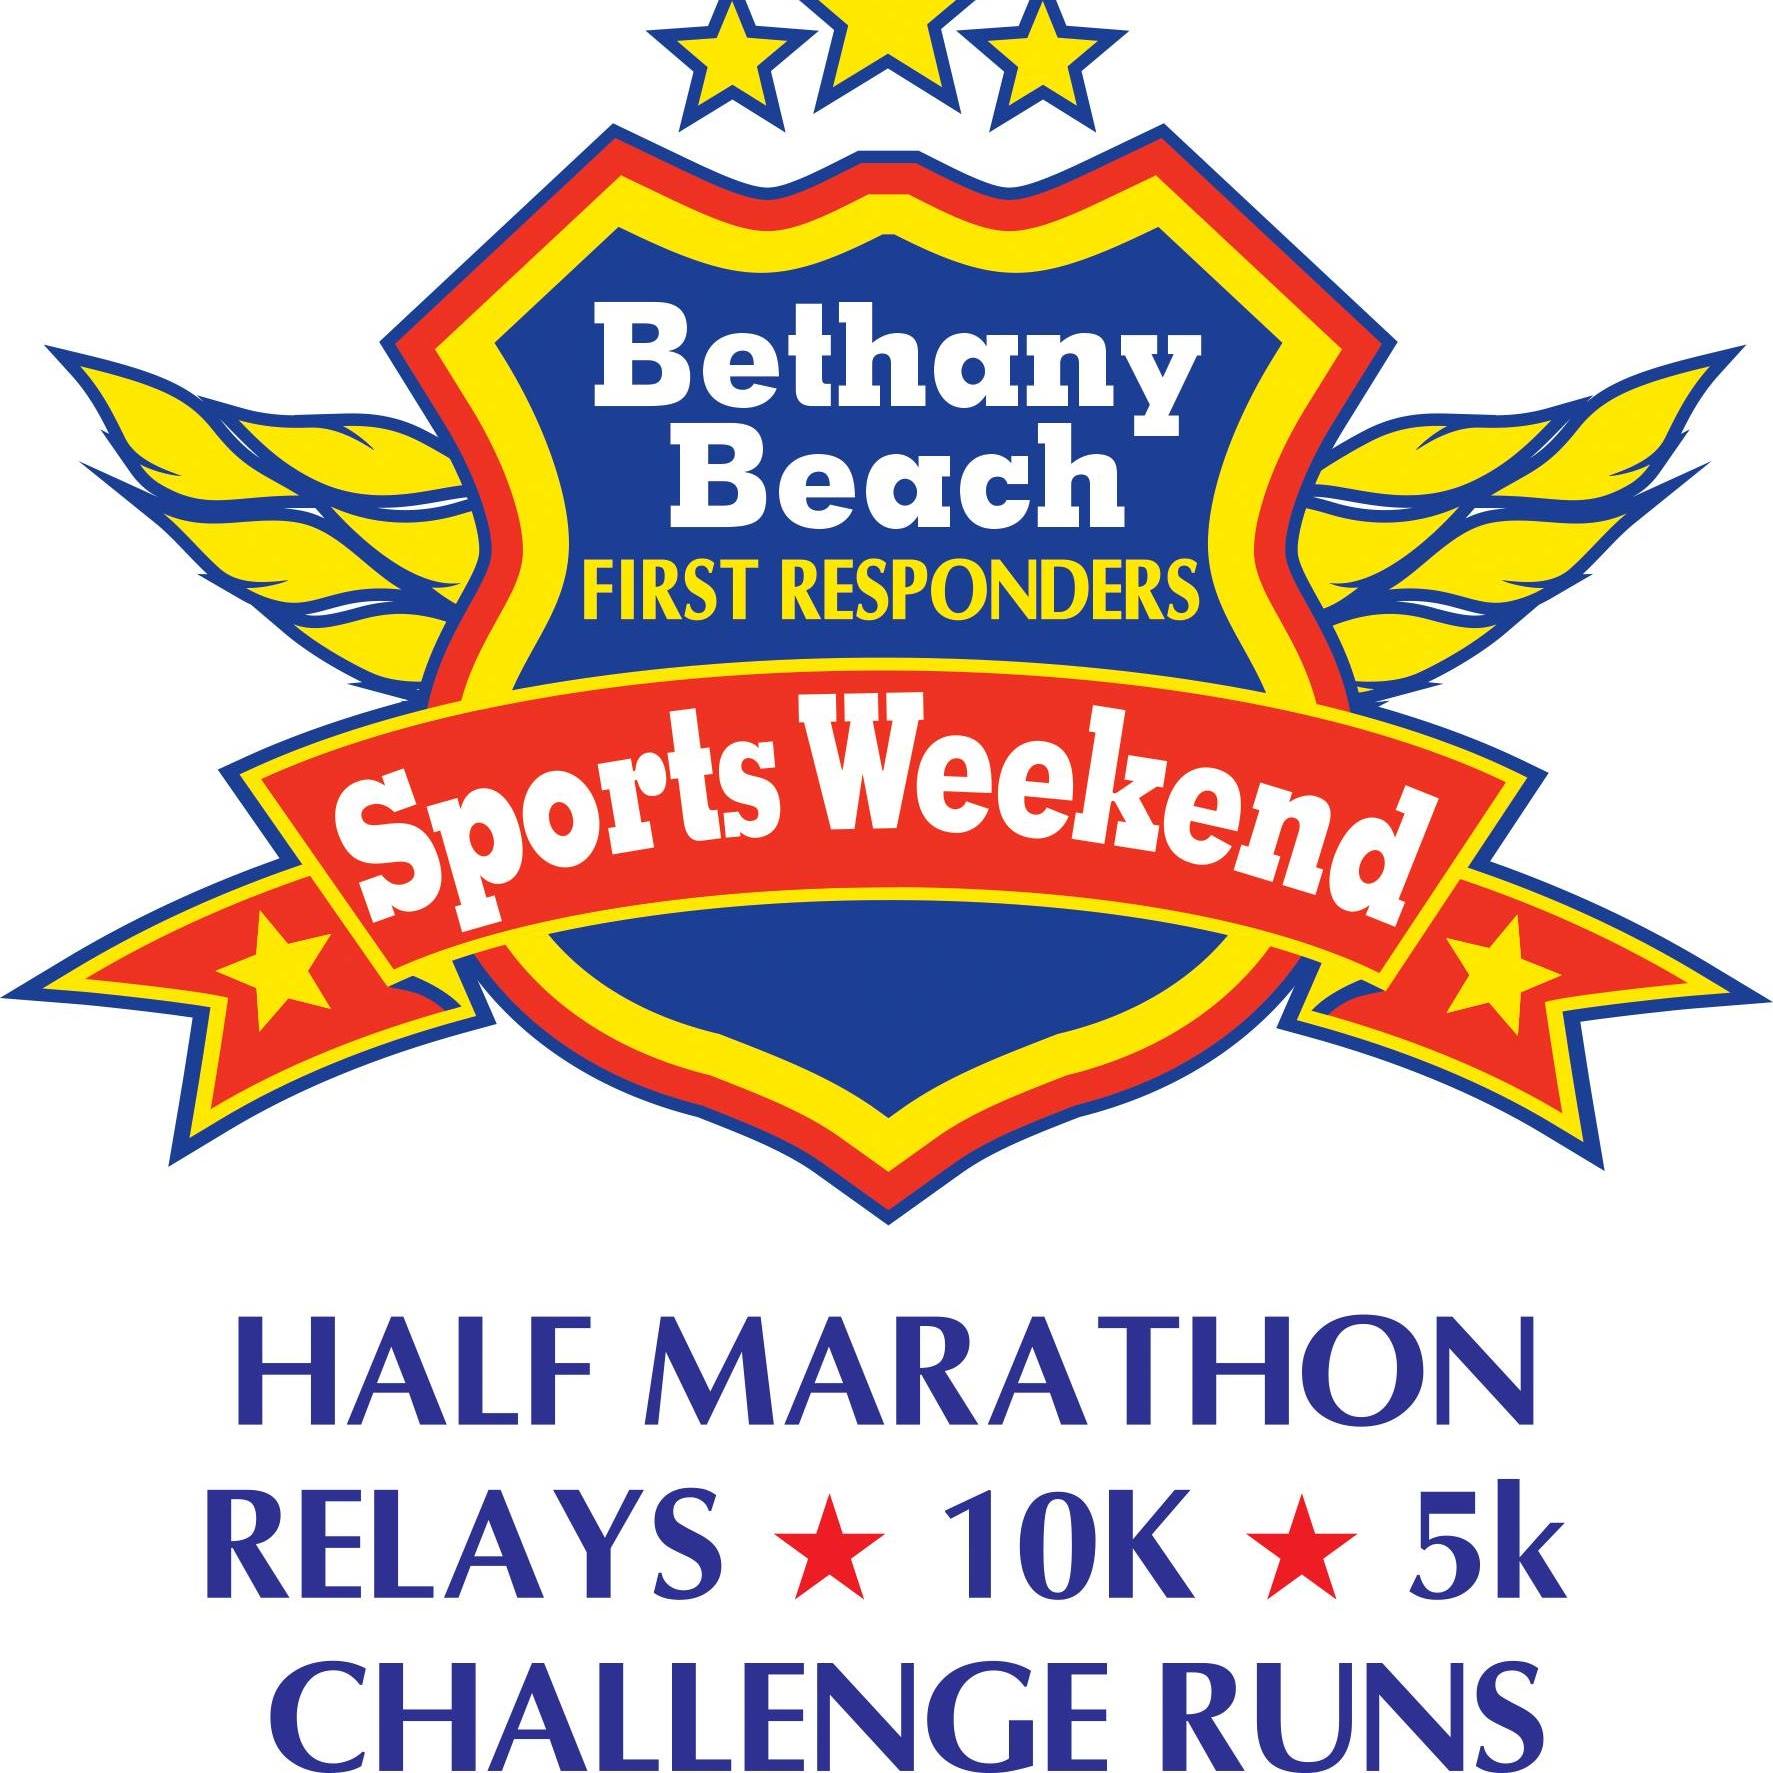 Bethany Beach First Responders Sports Weekend Race Reviews | Bethany